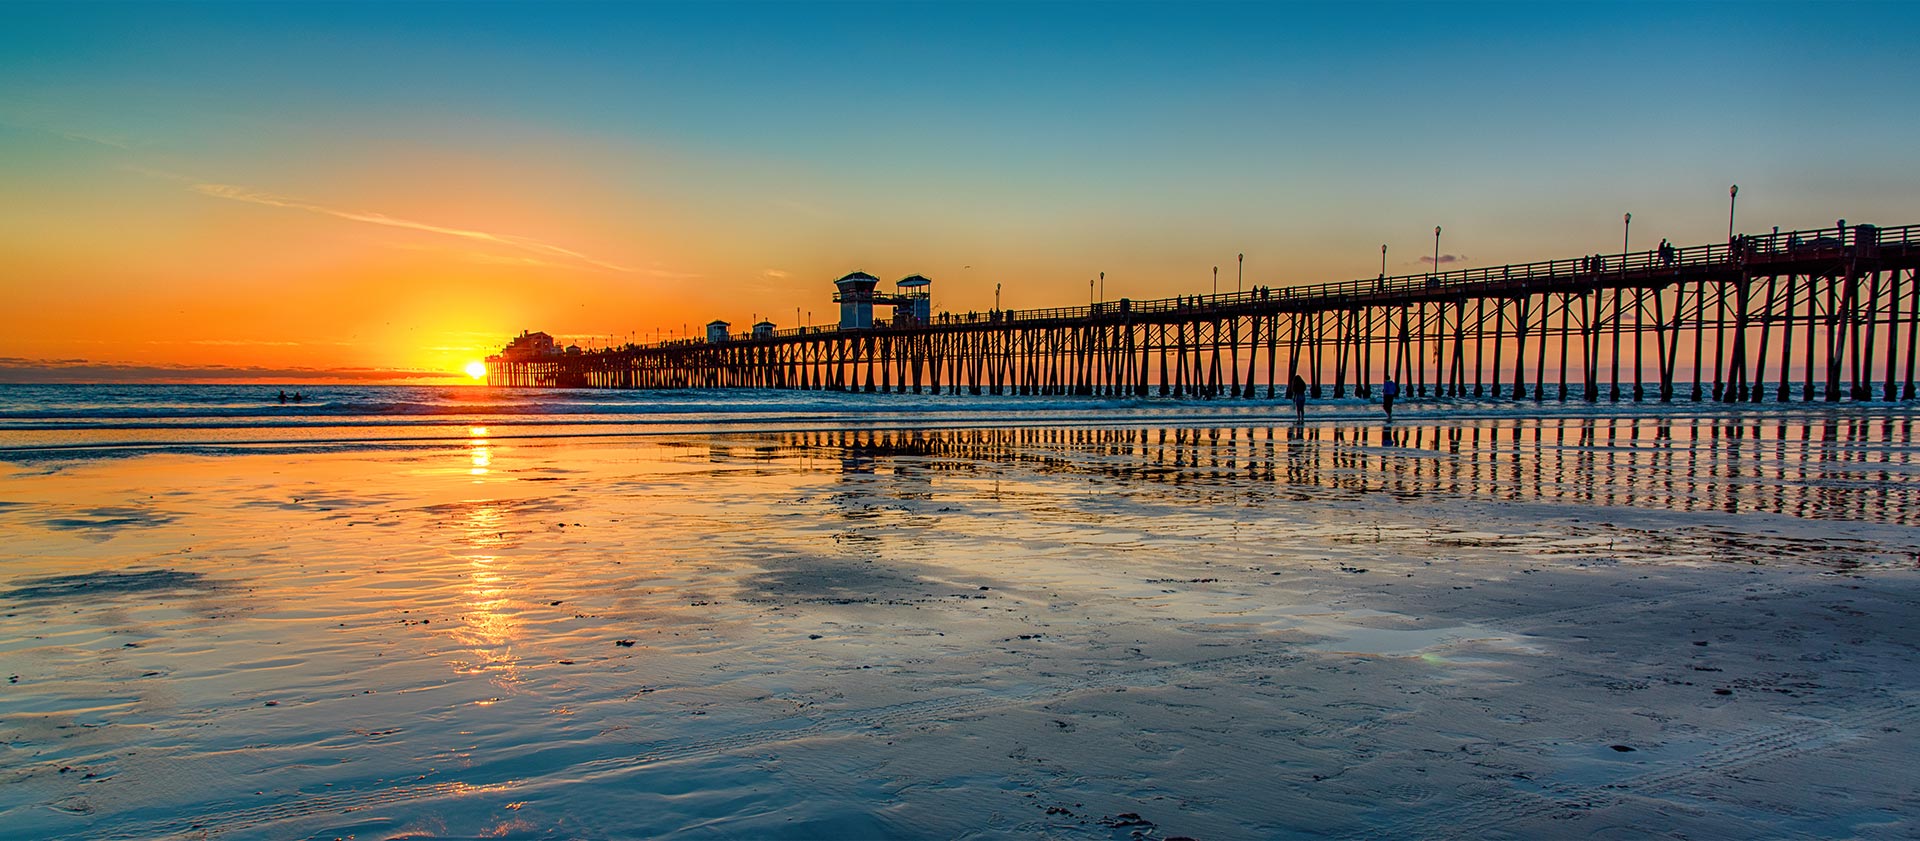 Beach with pier in Los Angeles